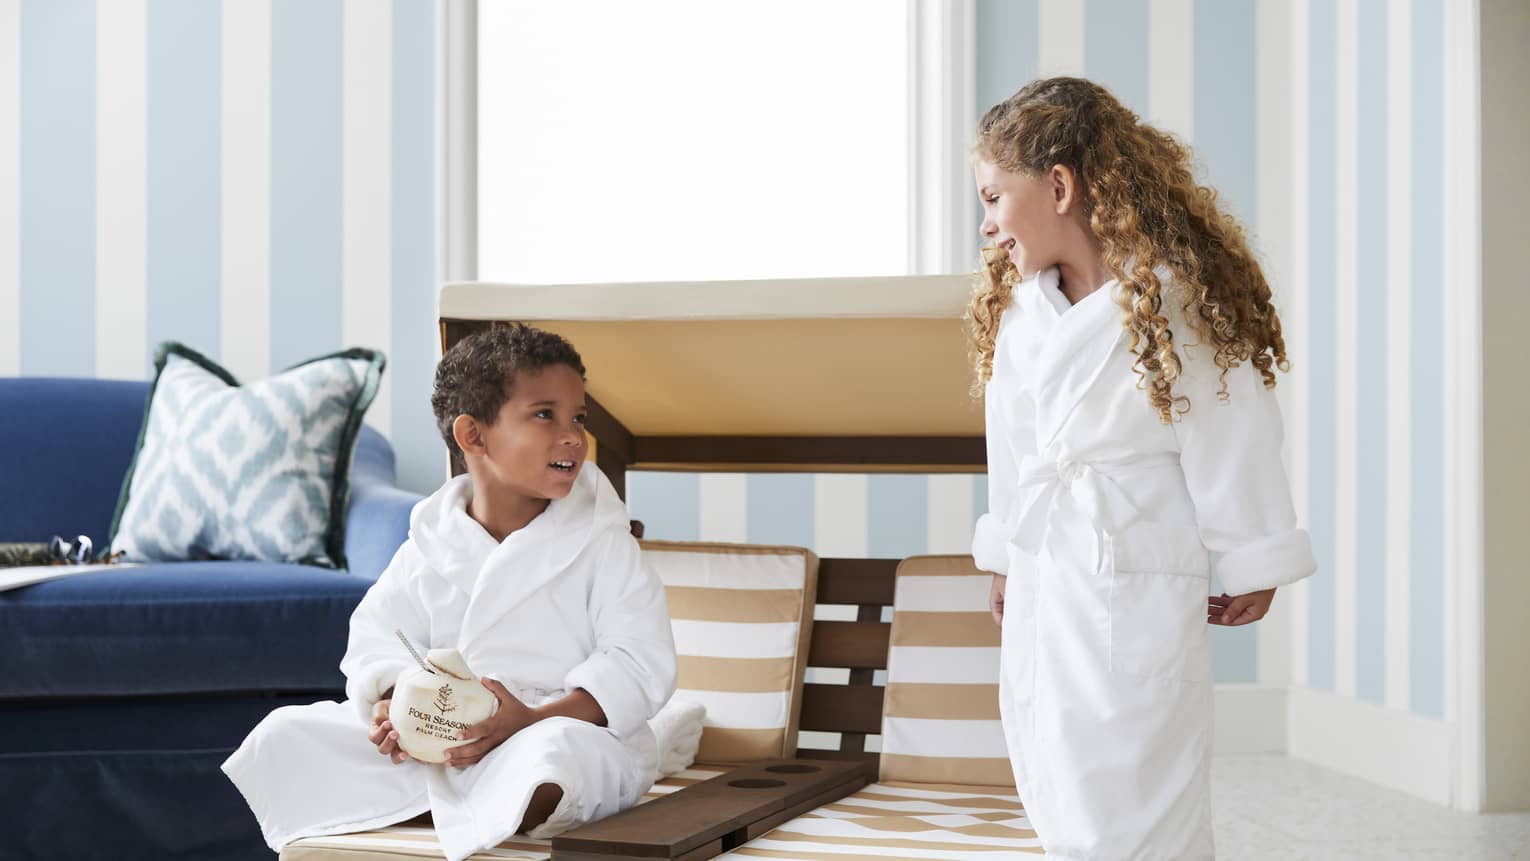 Young guests relax in white robes and enjoy a coconut beverage